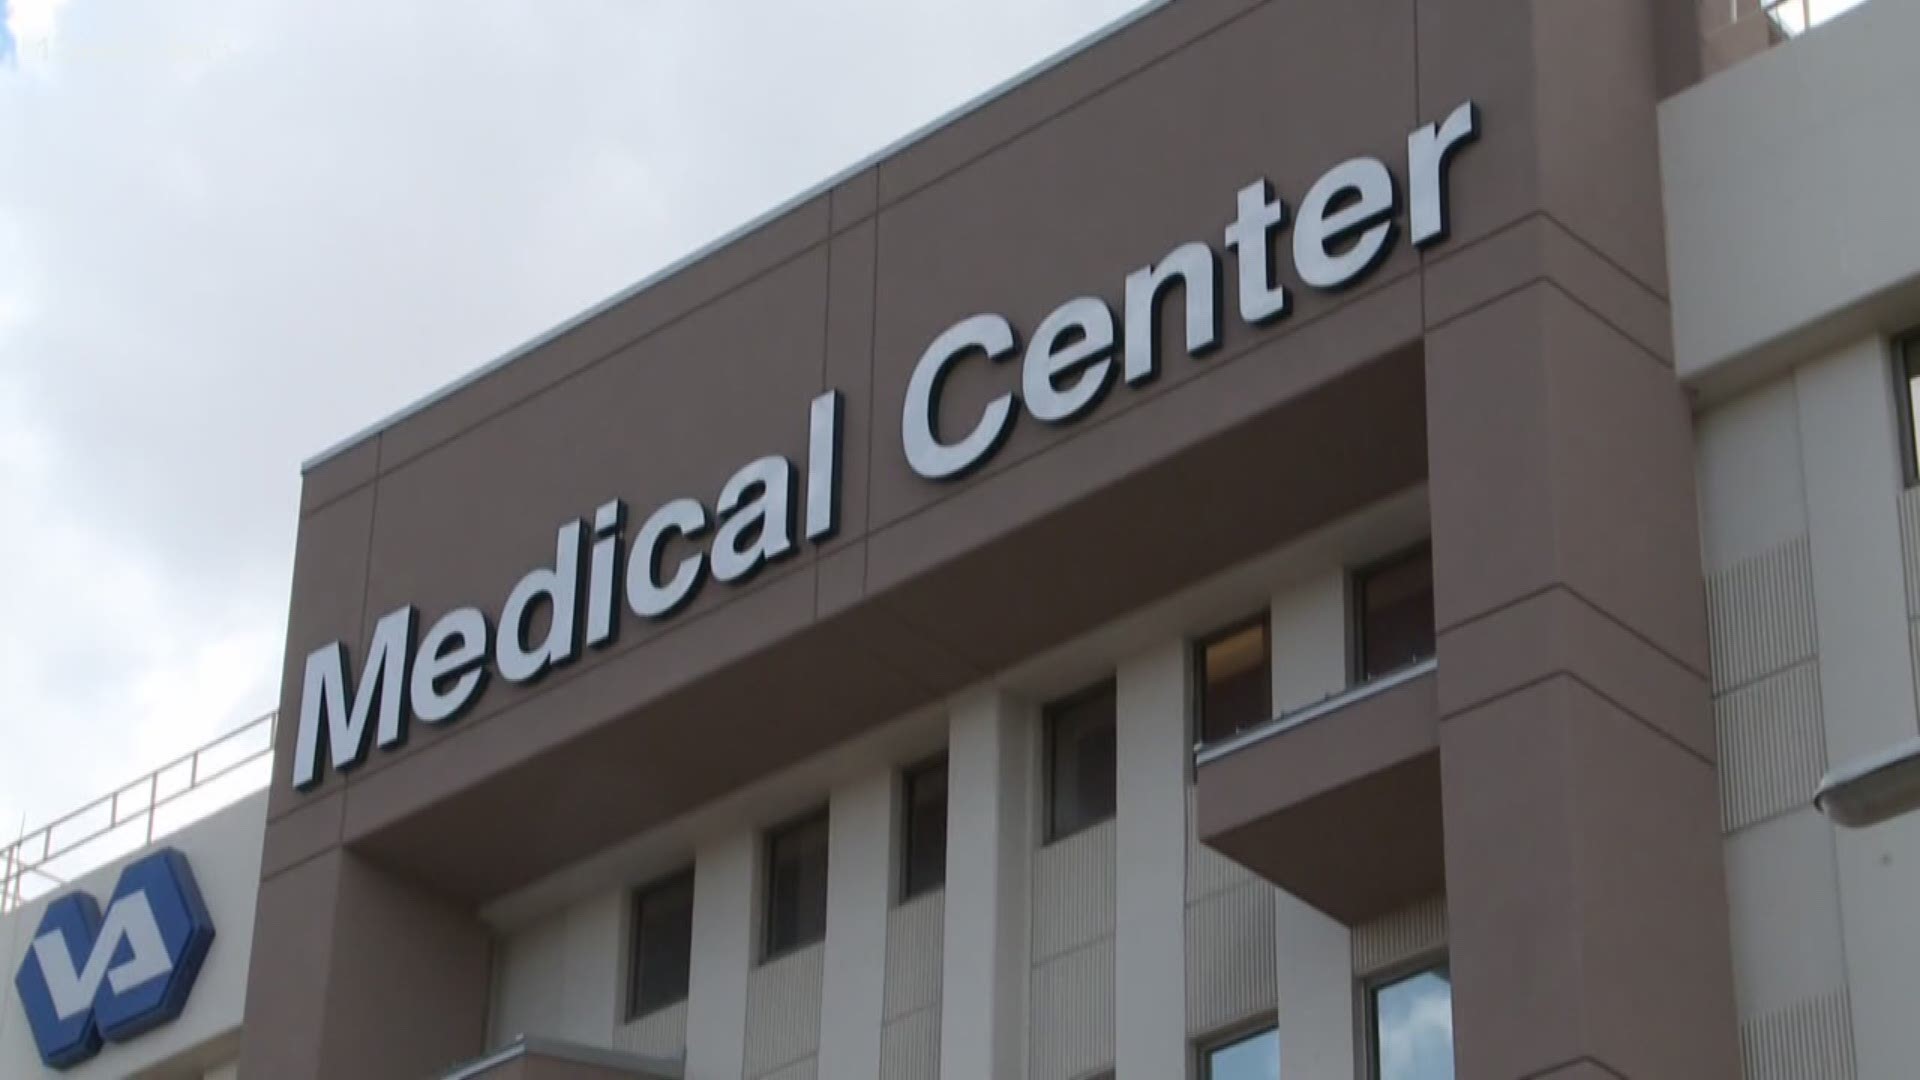 Some veterans say the wait times the Phoenix VA is reporting are not accurate.